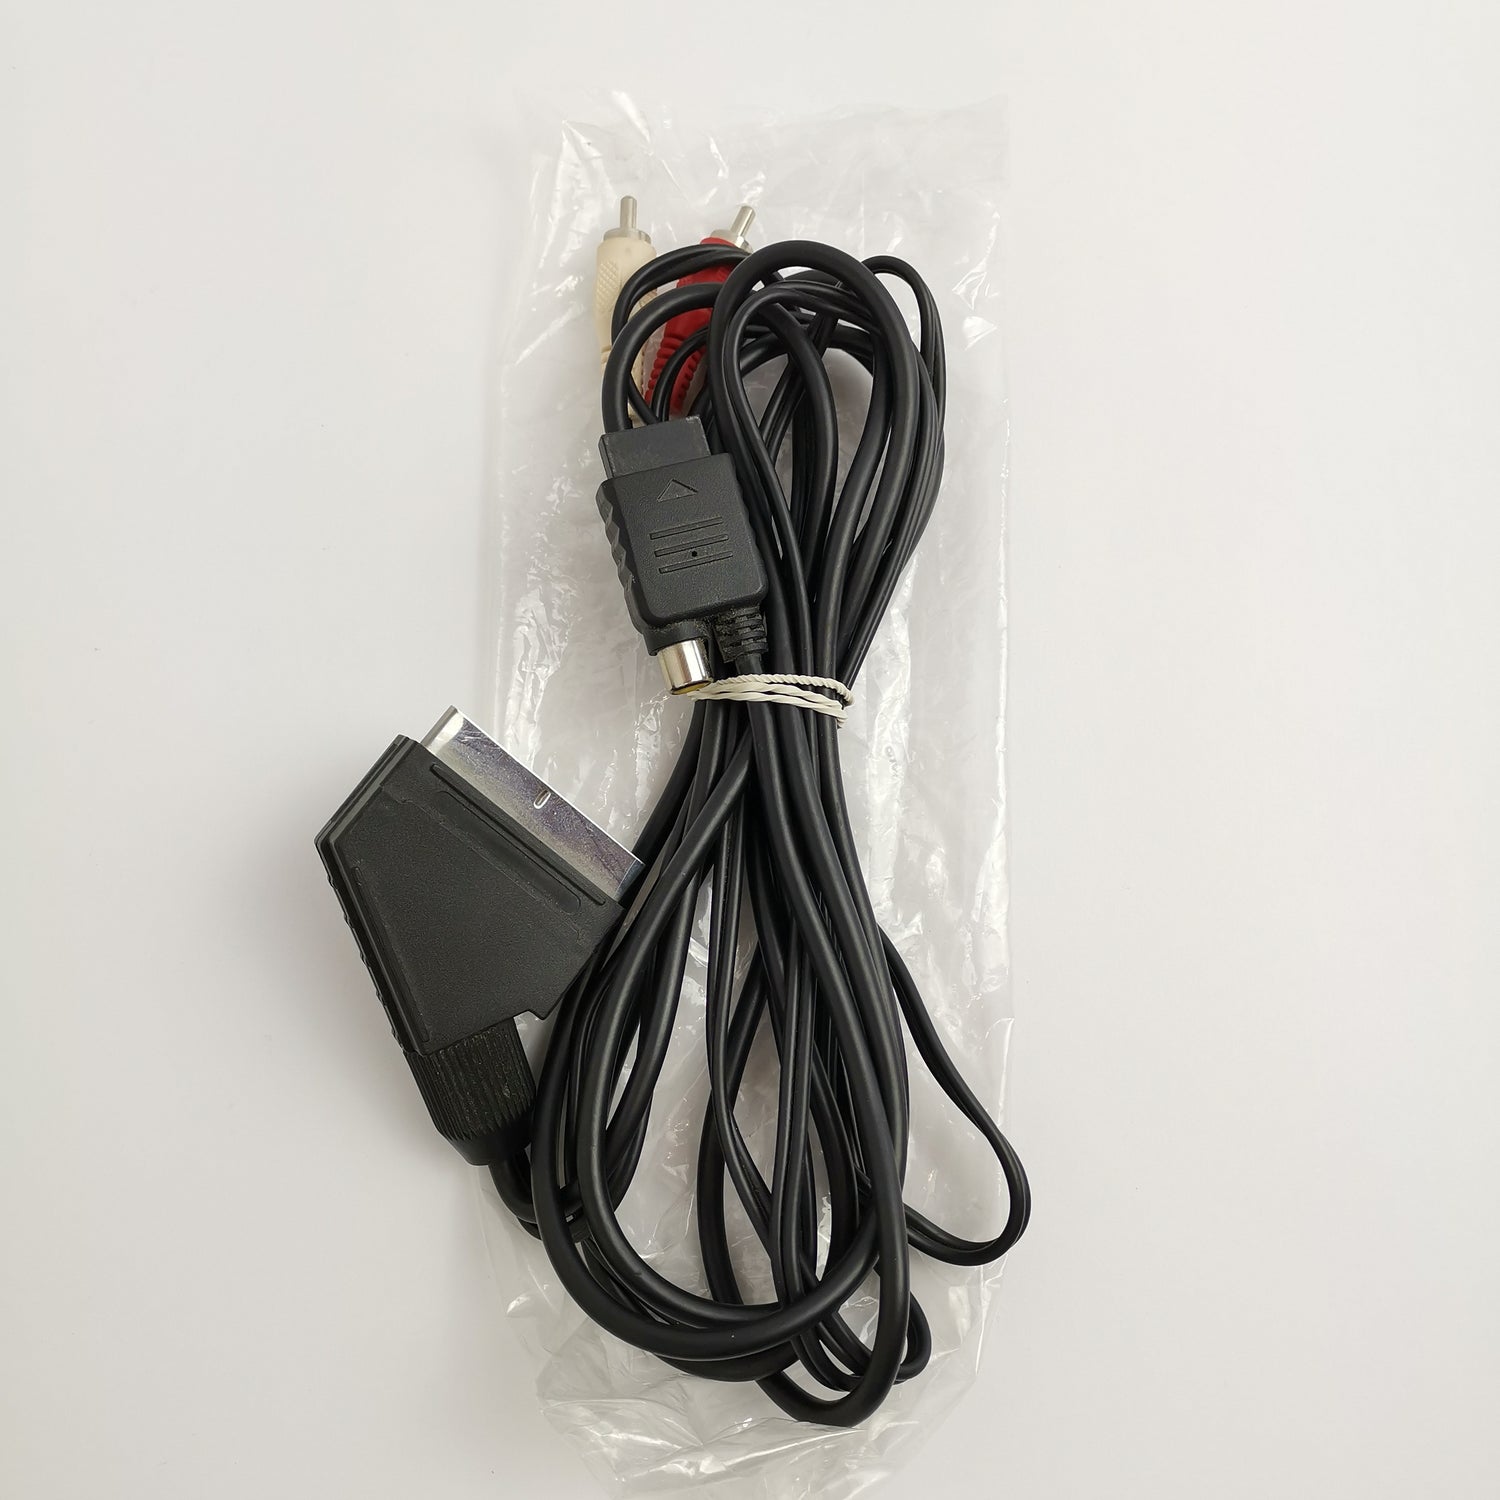 Sony Playstation 1 Accessories: RGB Scart x 2 Audio Cable Cable | PS1 PSX - original packaging